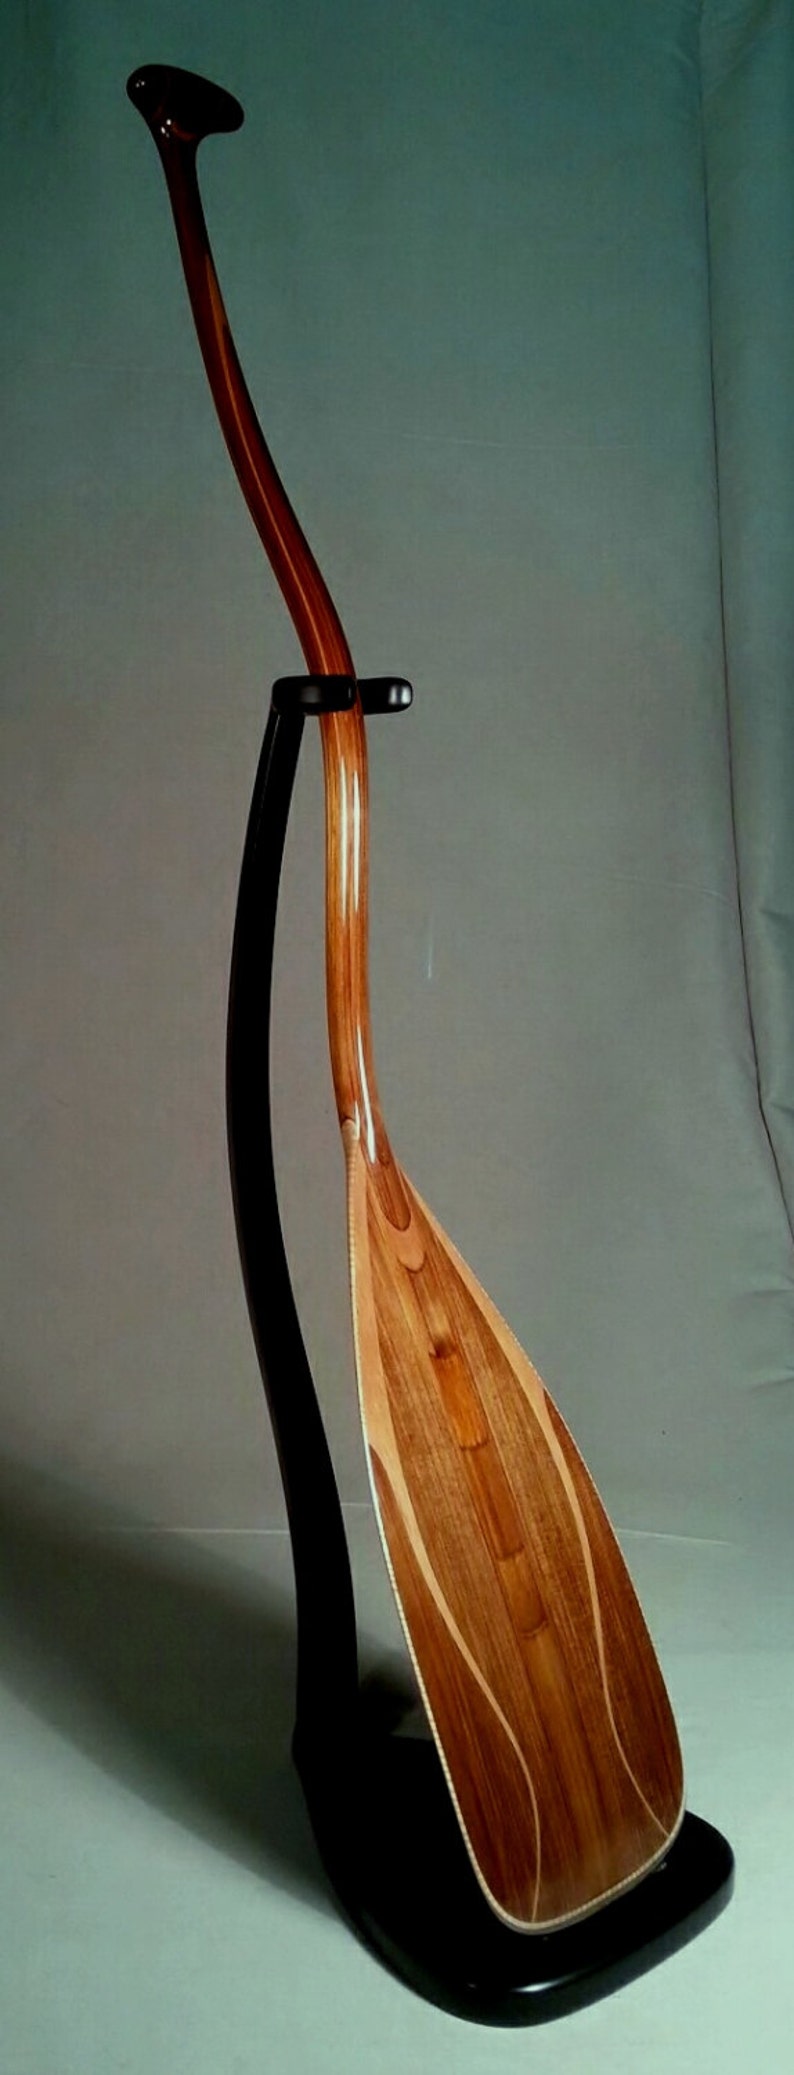 Wooden Canoe Paddle 12 degree Double Bend S-Blade | Etsy